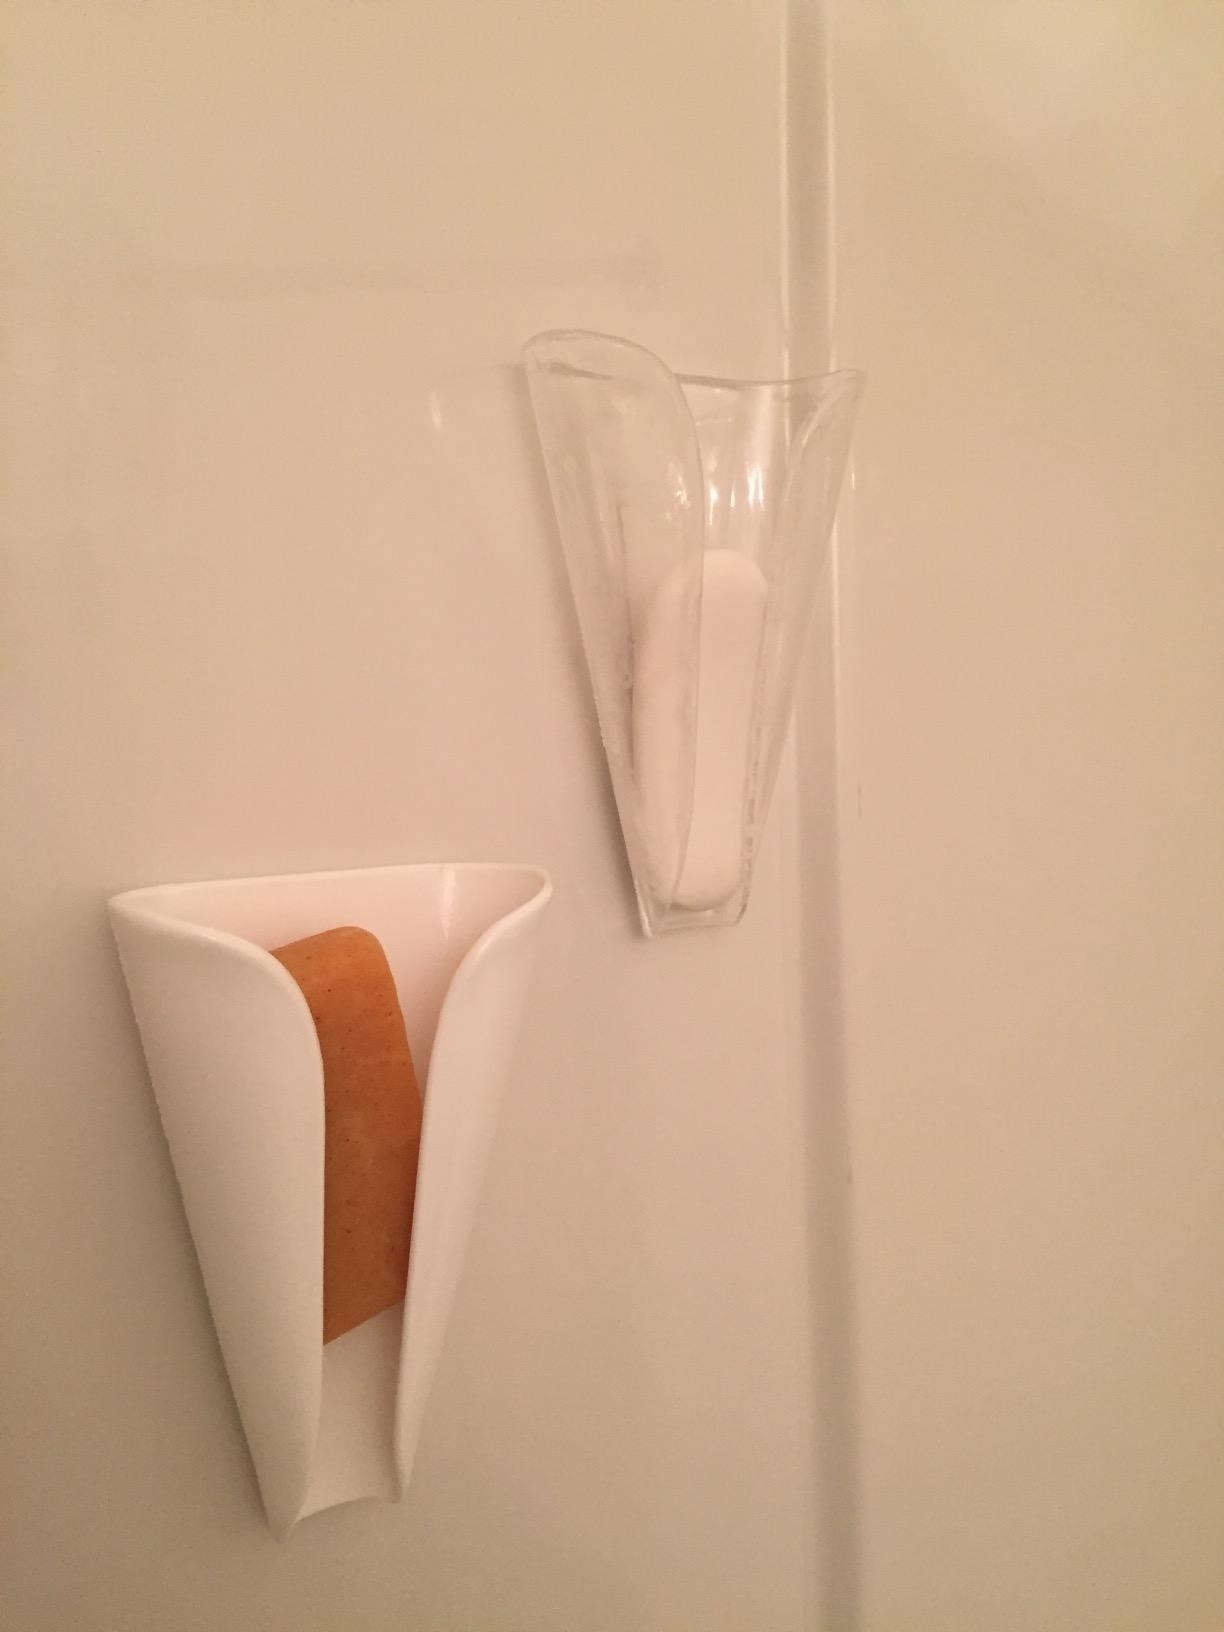 Reviewer photo of the soap holder, one white and one clear